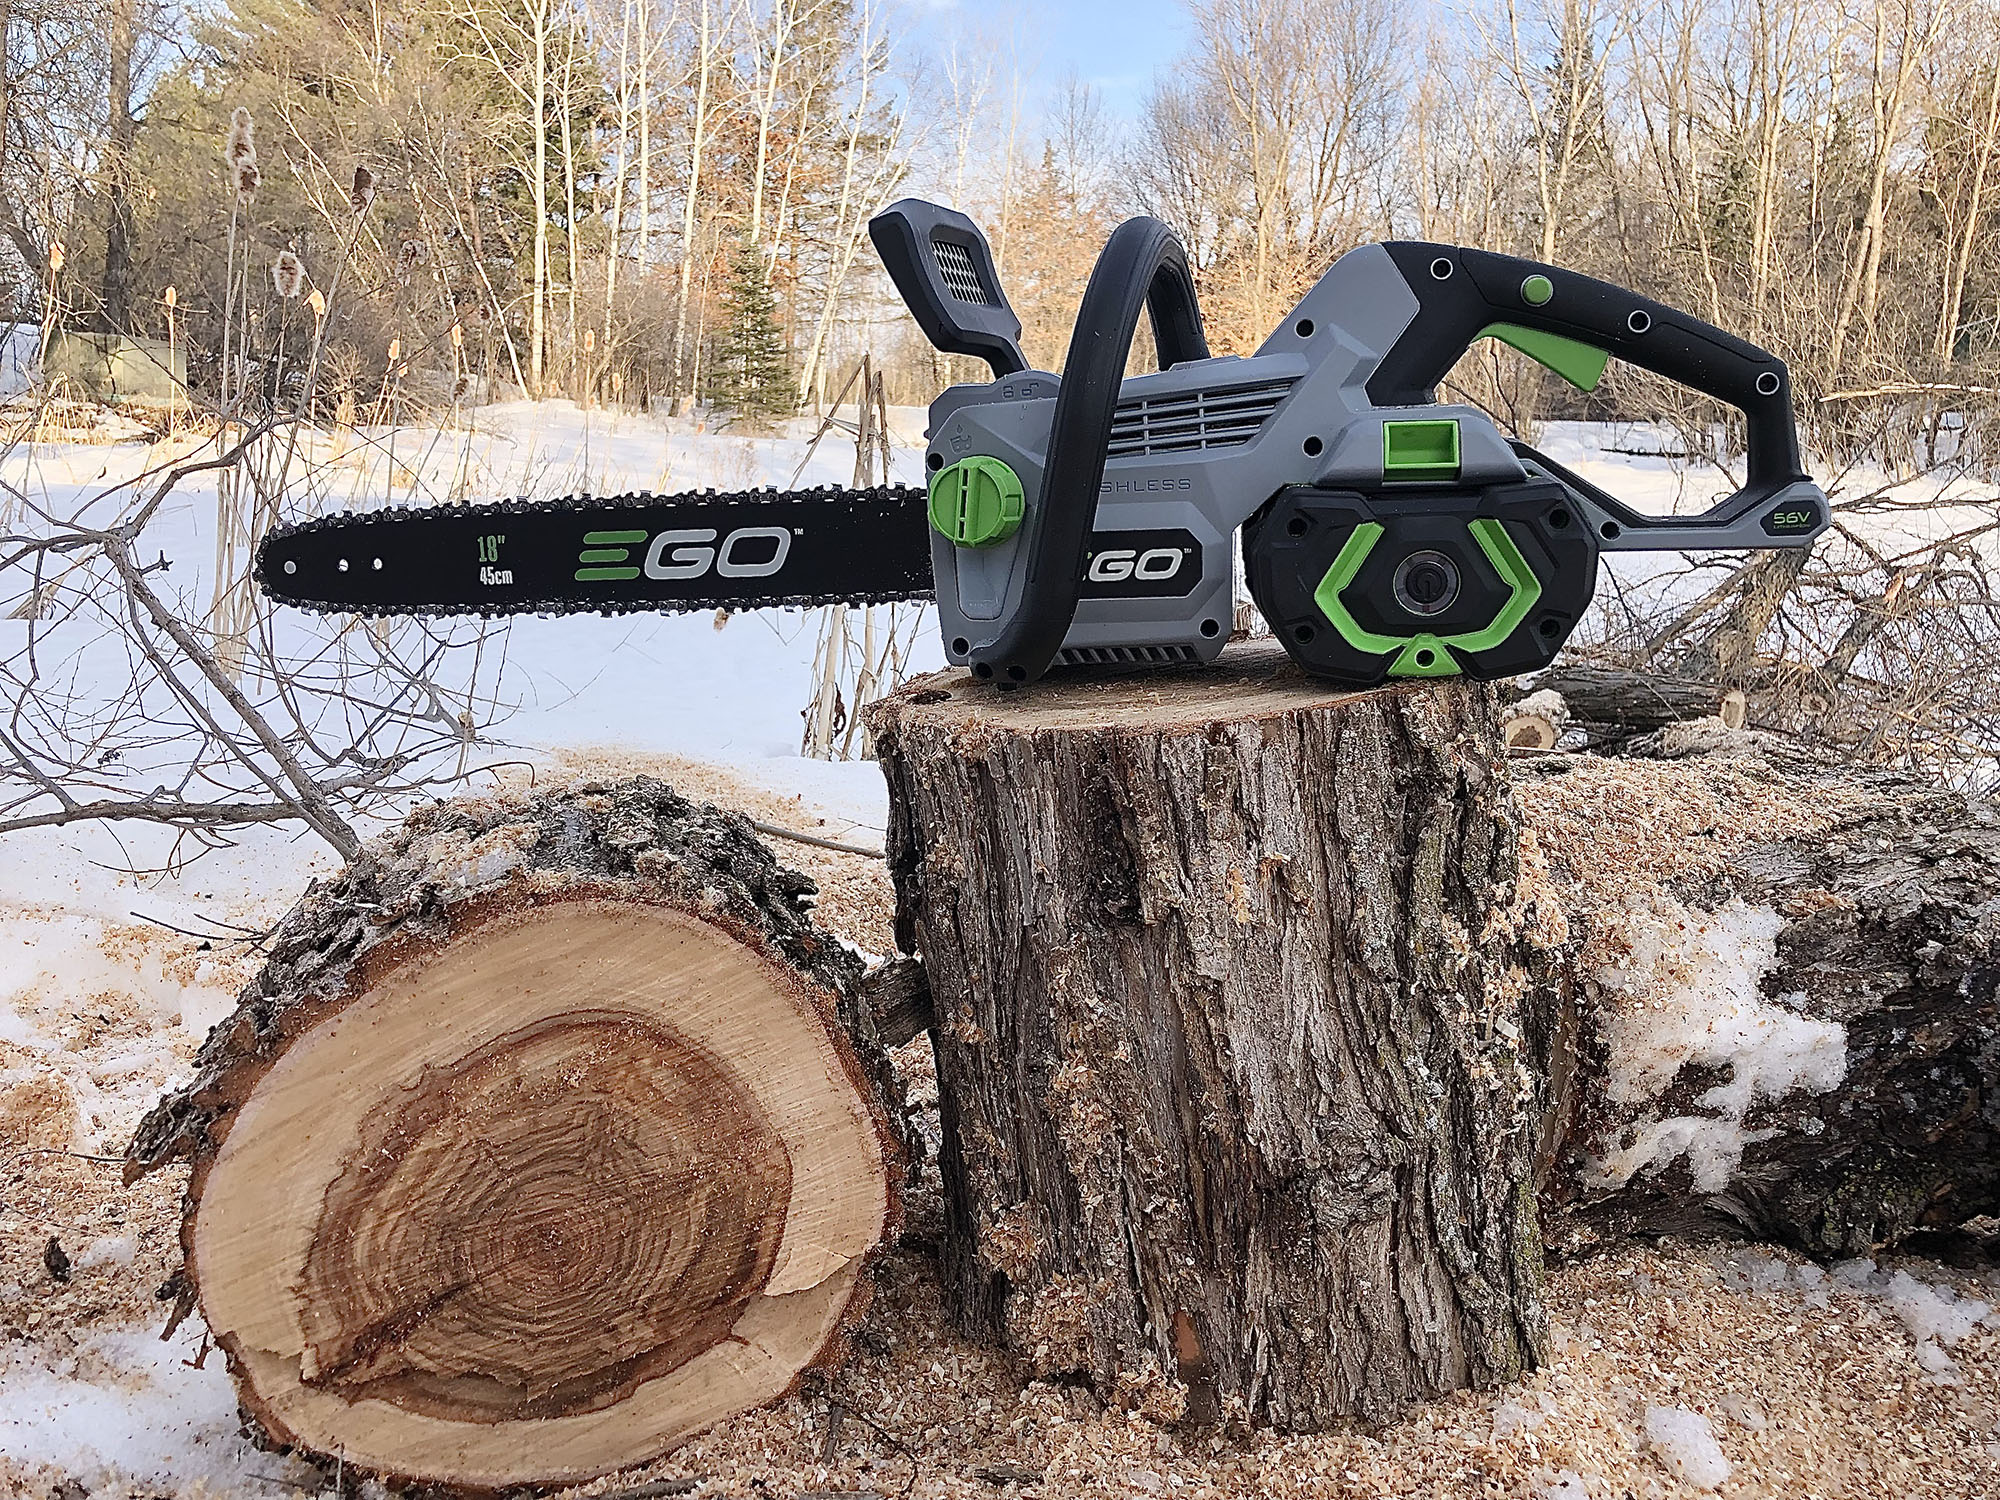 ego battery powered chainsaw